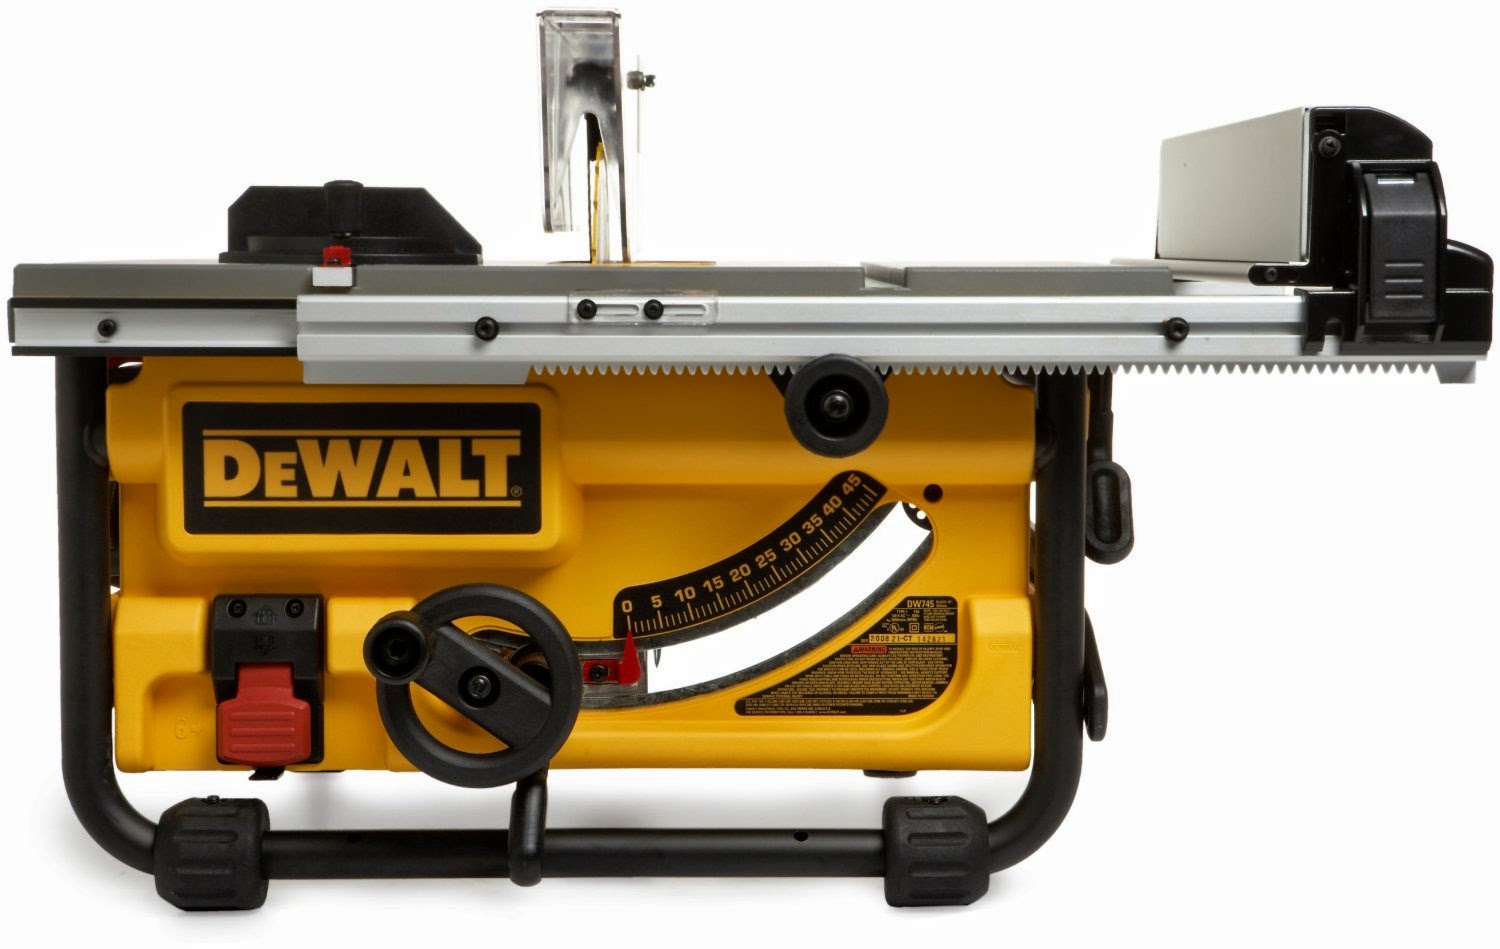 DEWALT DW745 Table Saw with 20" rip for easy cutting of larger shelving and trim materials